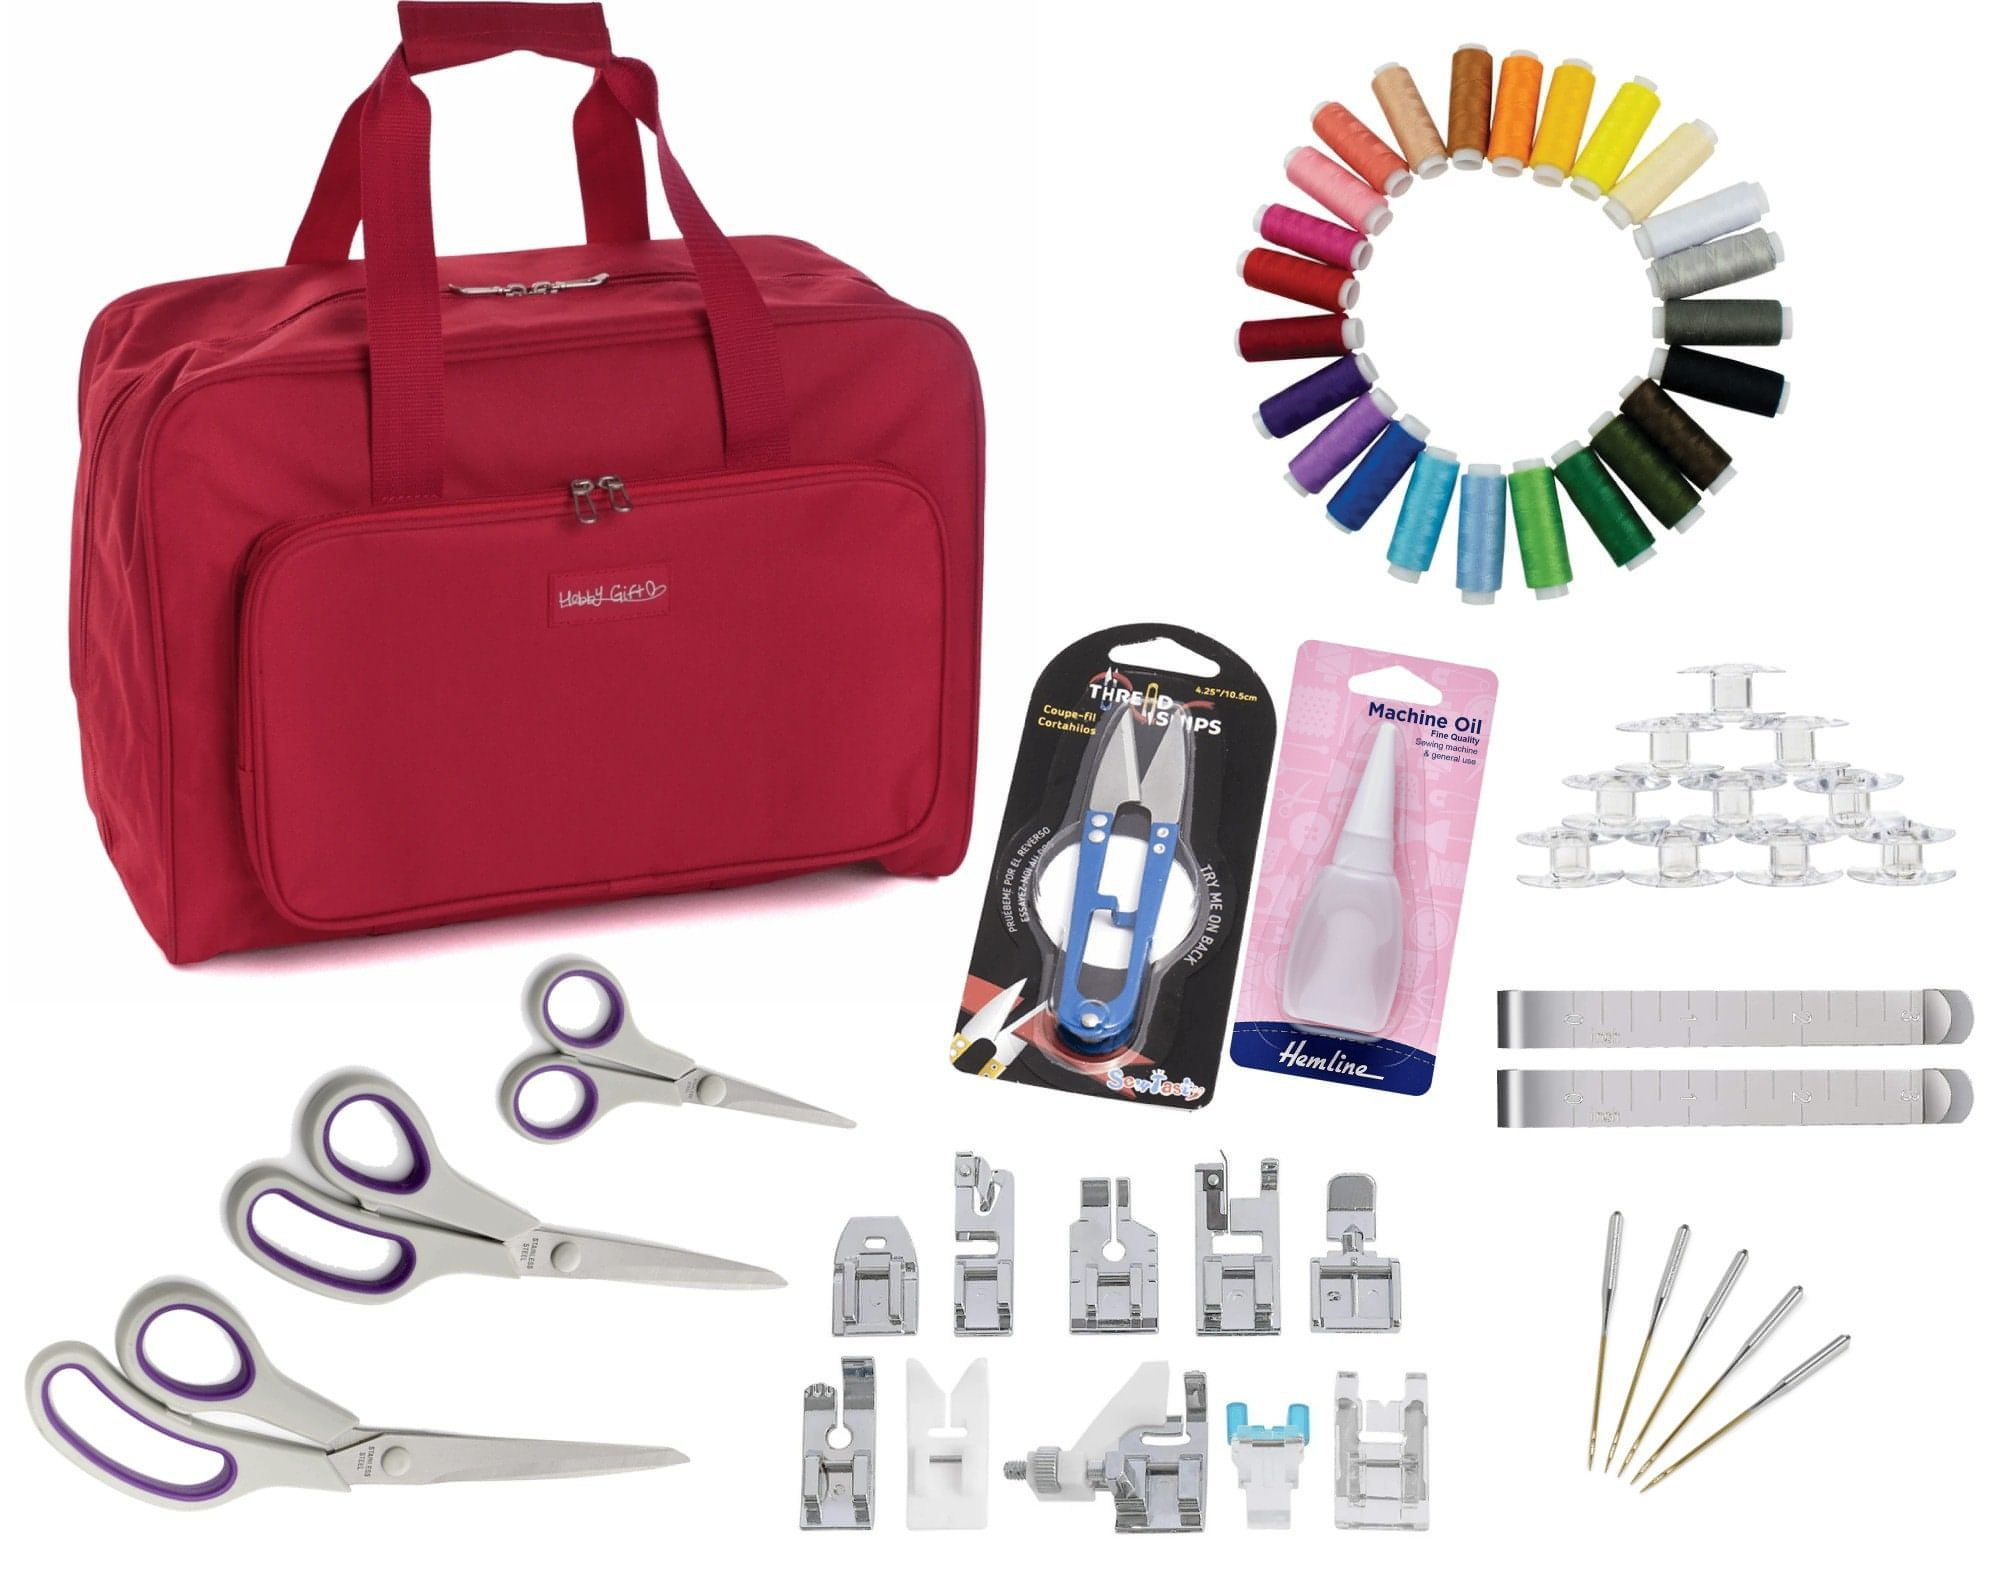 Platinum Sewing Bundle - Save over 50%! Exclusive to Singer Outlet